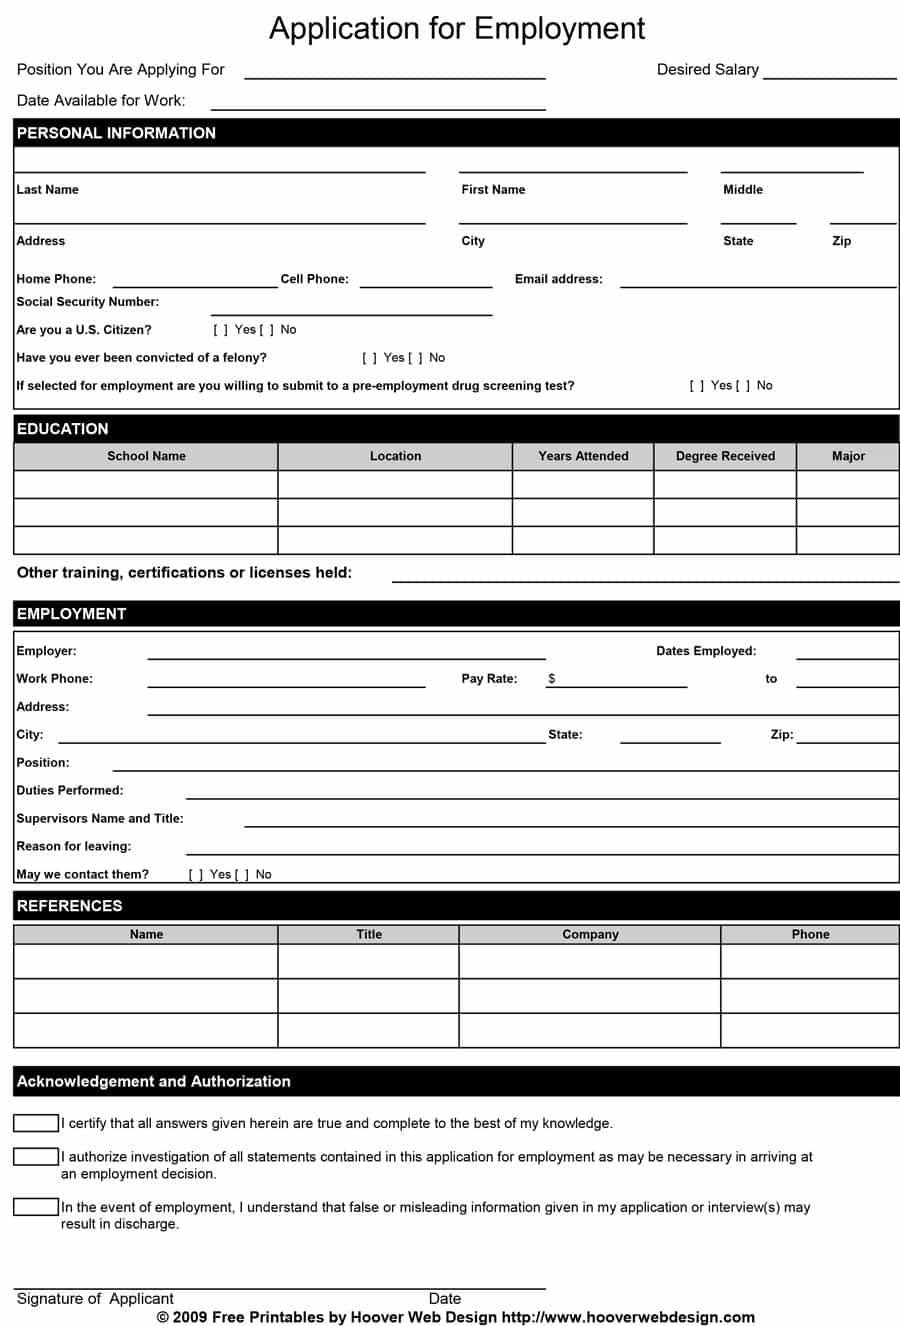 Free Printable Application For Employment Template | Ellipsis - Free Online Printable Applications